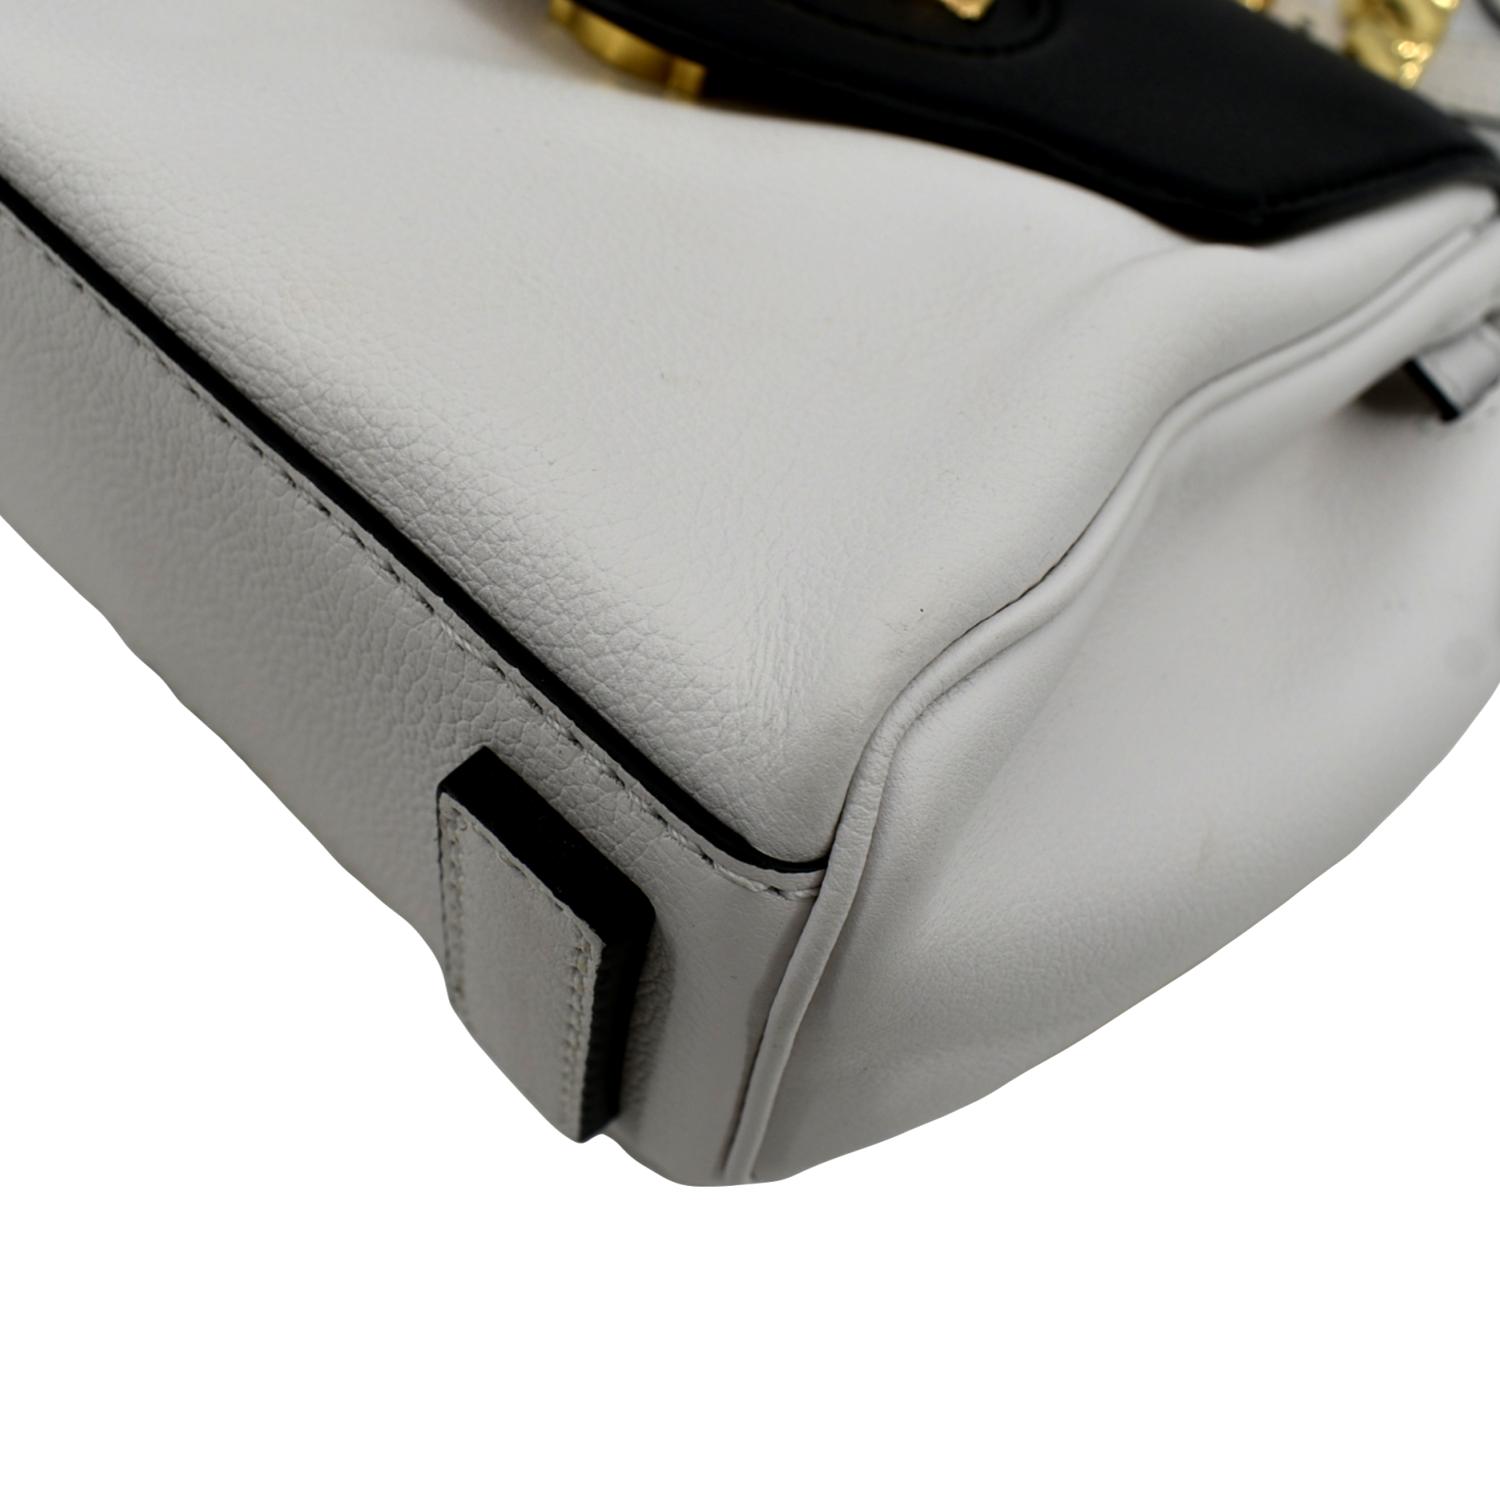 Handling it with care - the La Medusa Top Handle Bag from Versace.  Impeccable service, every time. #AmericanaManhasset